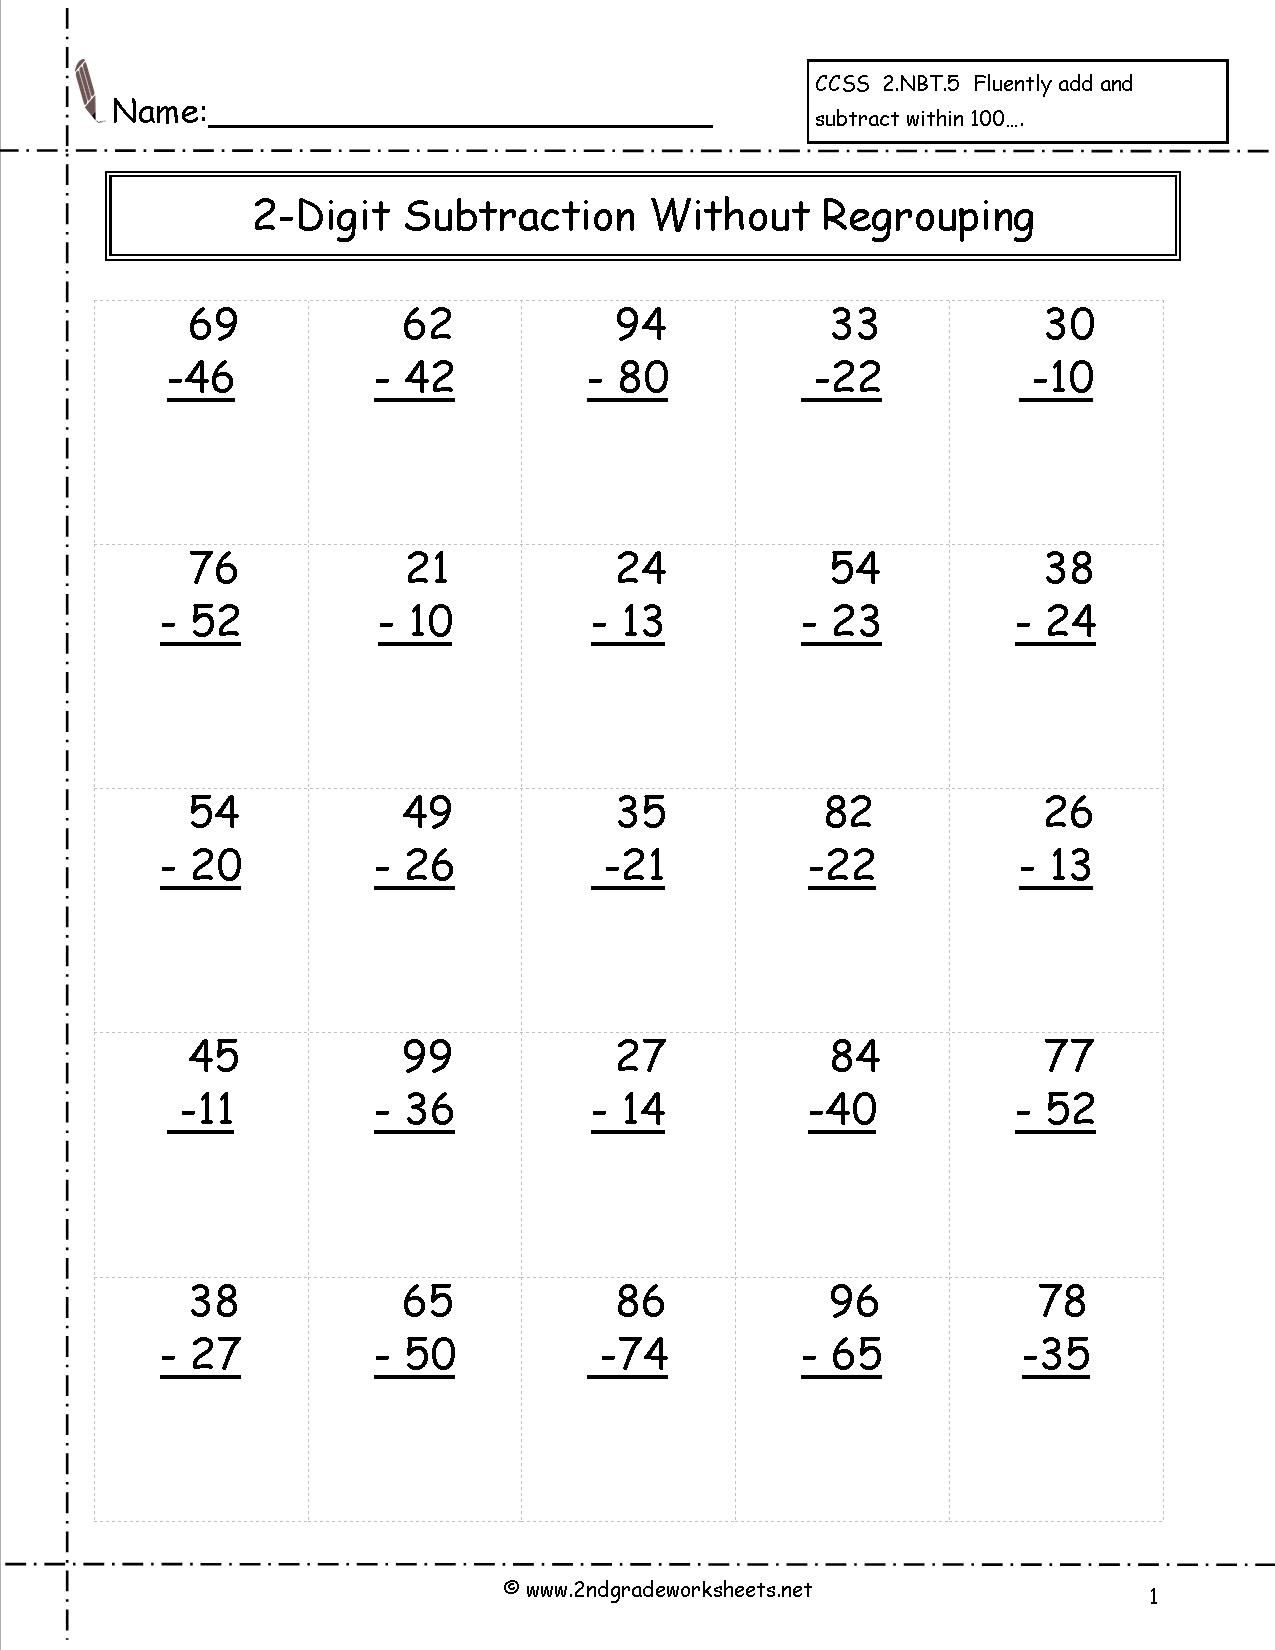 Two Digit Subtraction Without Regrouping Worksheet | 2Nd Grade - Free Printable Double Digit Addition And Subtraction Worksheets